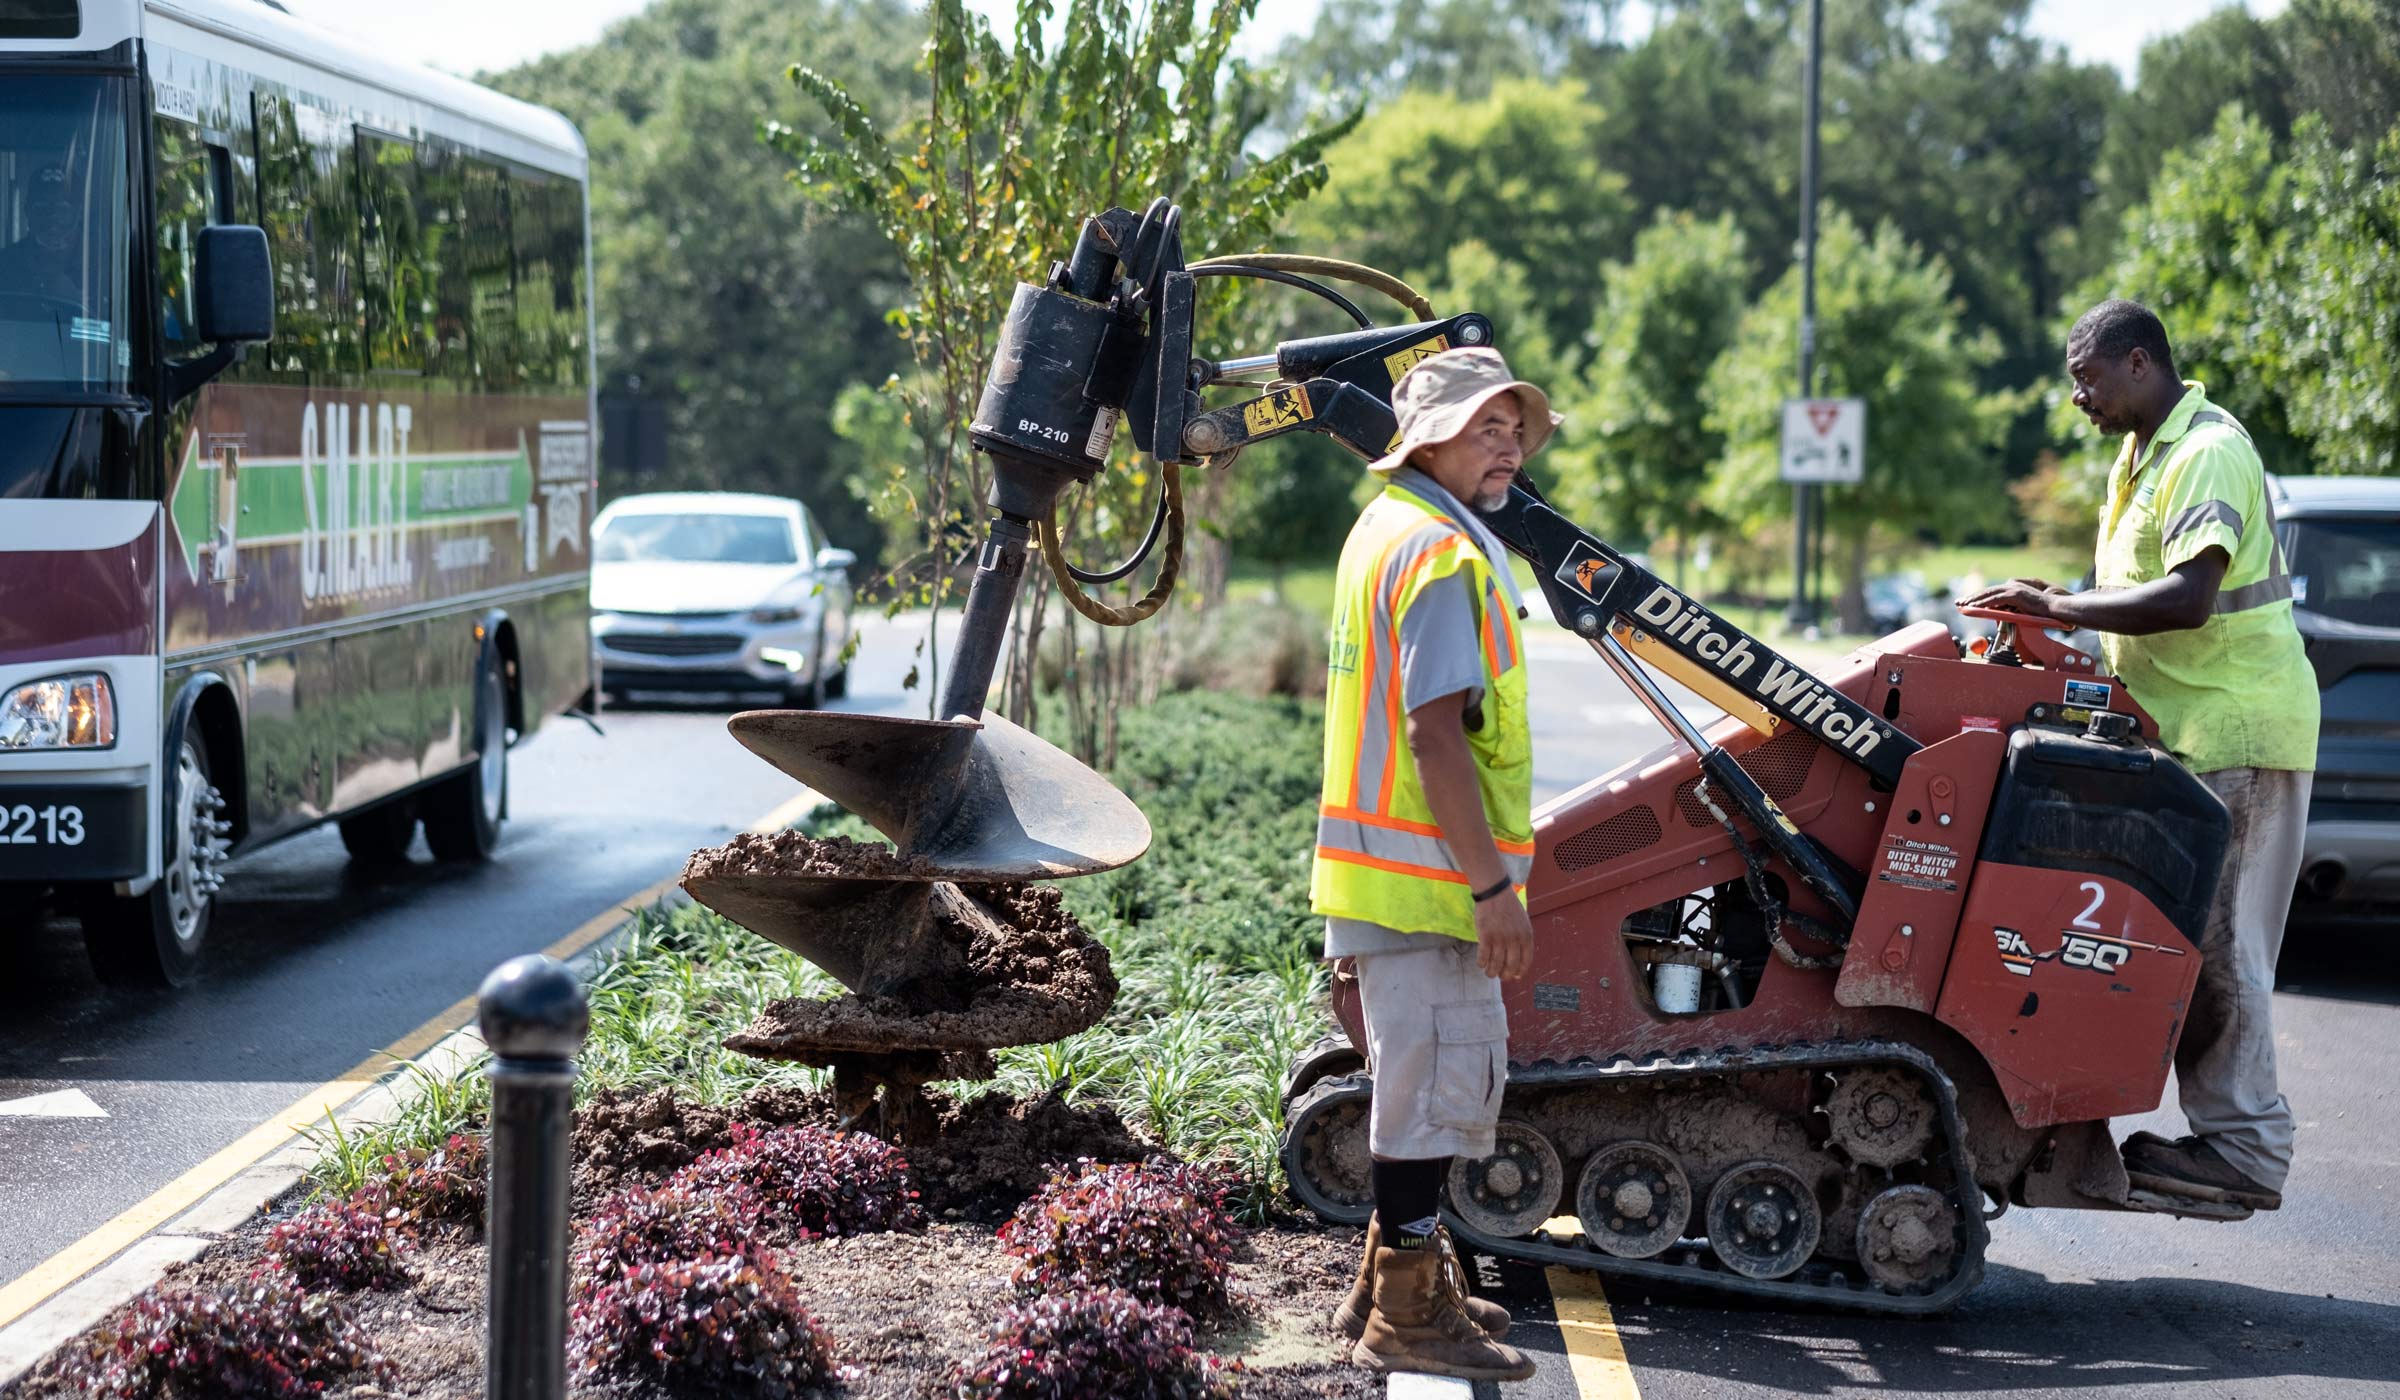 Two members of the campus landscape crew work planting trees in the new landscaped median dividing Bailey Howell Drive. One worker operates a soil drilling machine, while a SMART shuttle bus passes to their left.